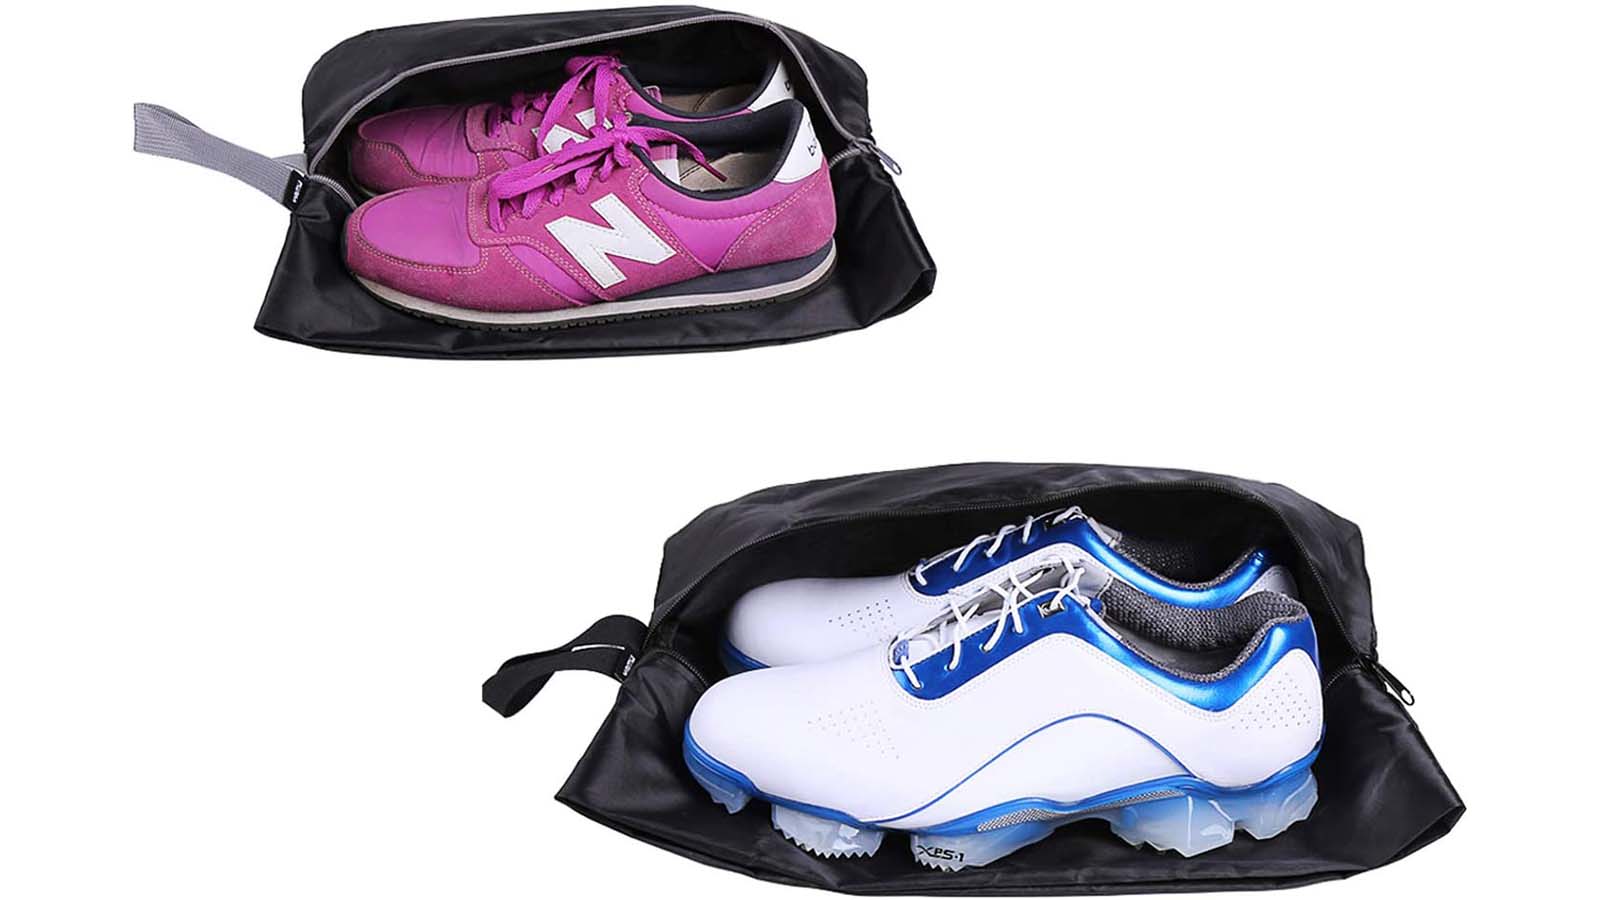 Emissary Shoe Bag Holds 3 Pair of Shoes for Travel Large